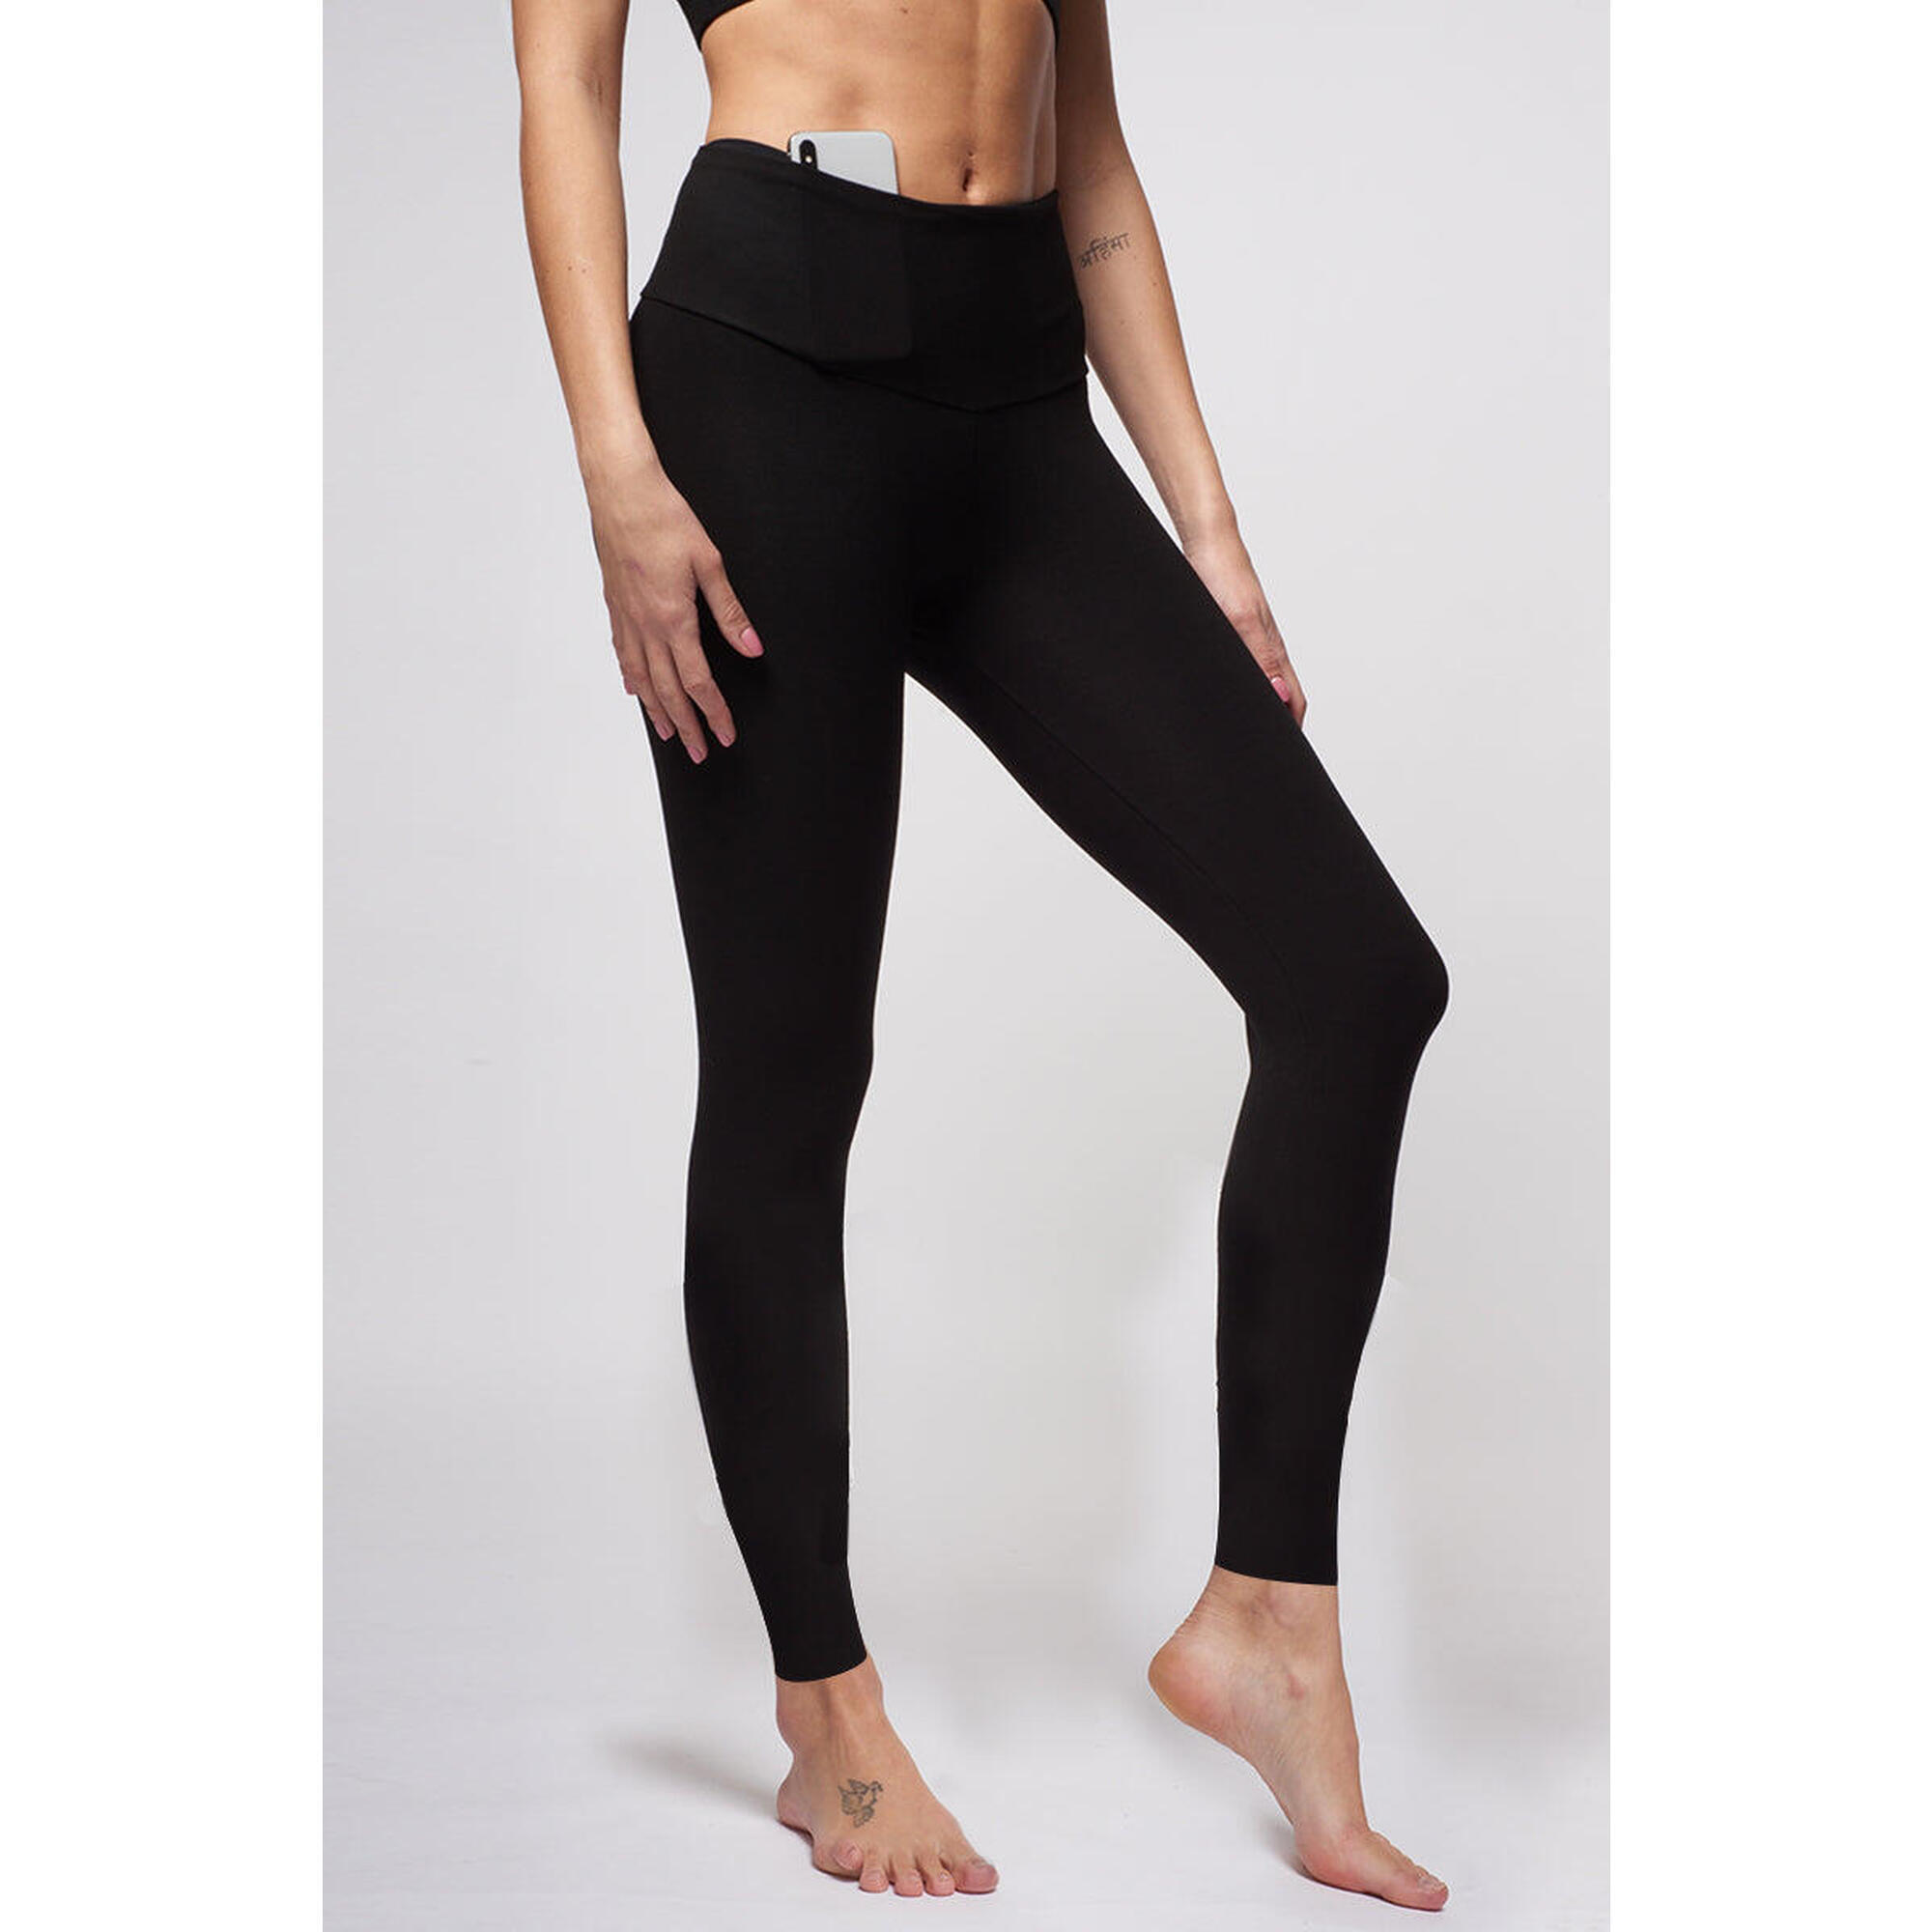 TLC SPORT Extra Strong Compression Leggings with Figure Firming Black